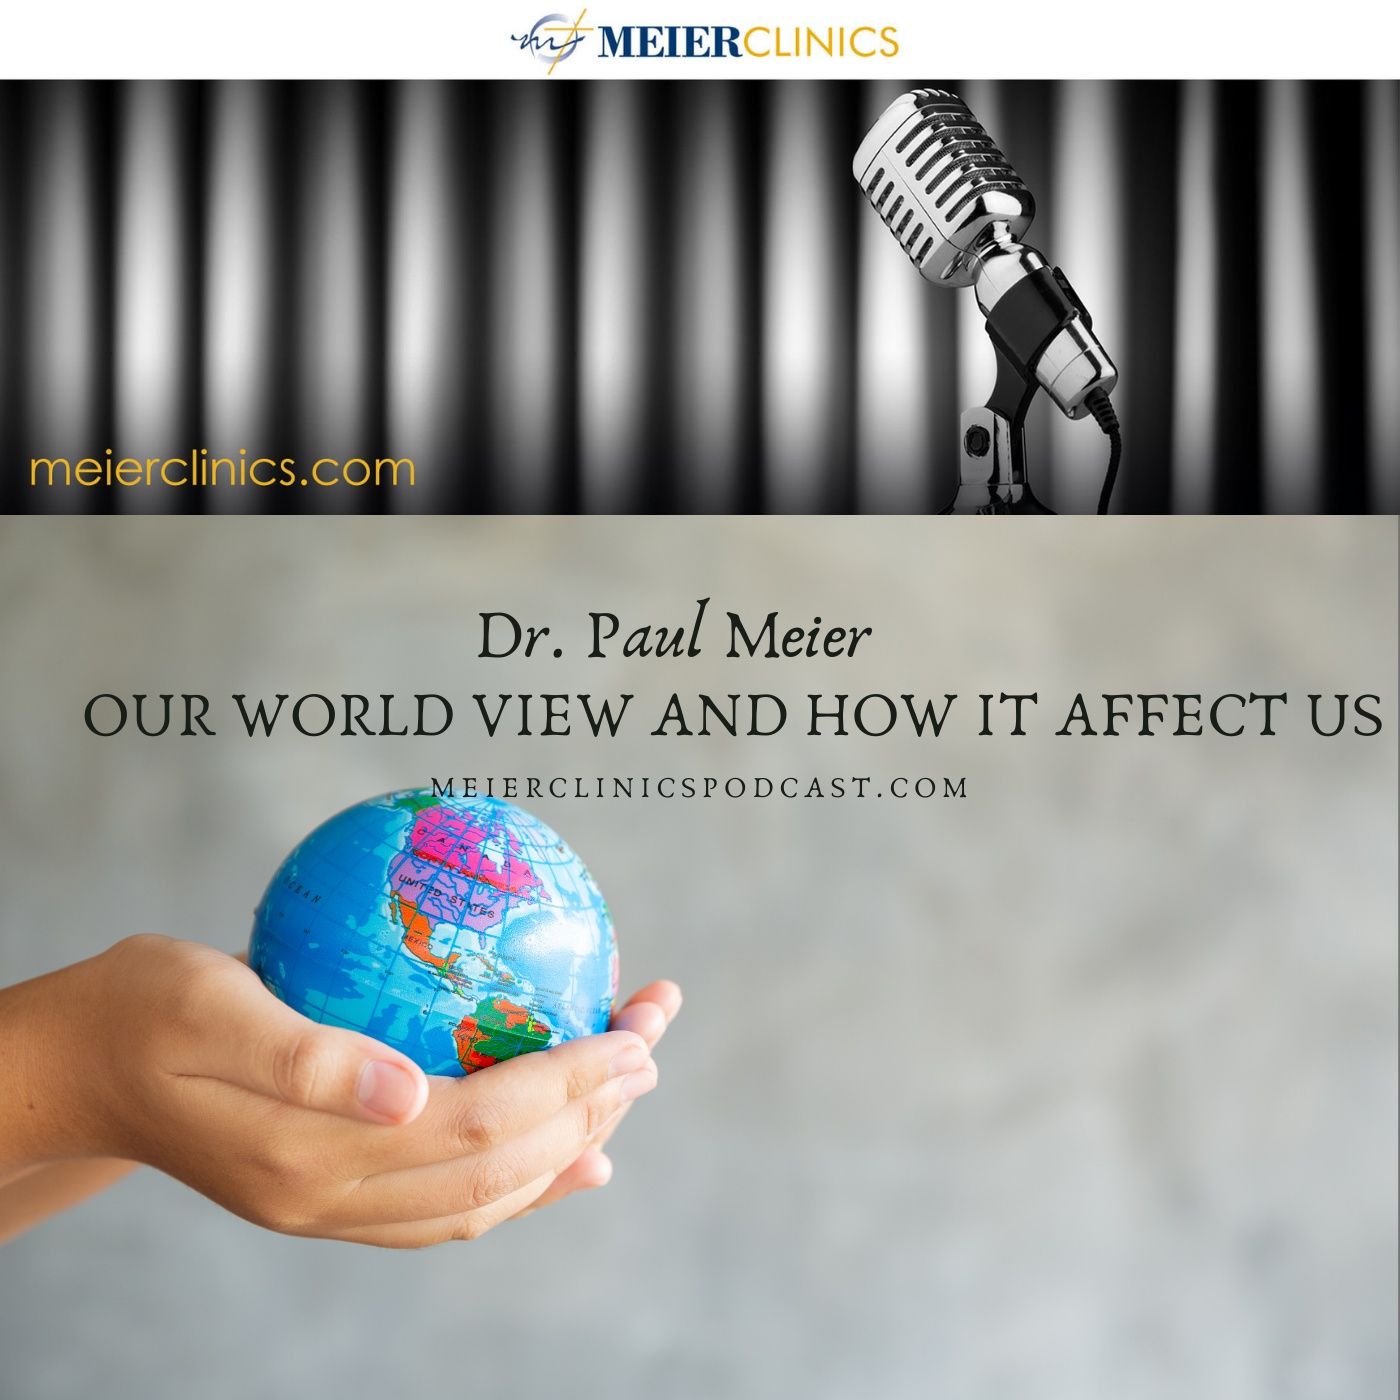 Our World View and How it Affects Us